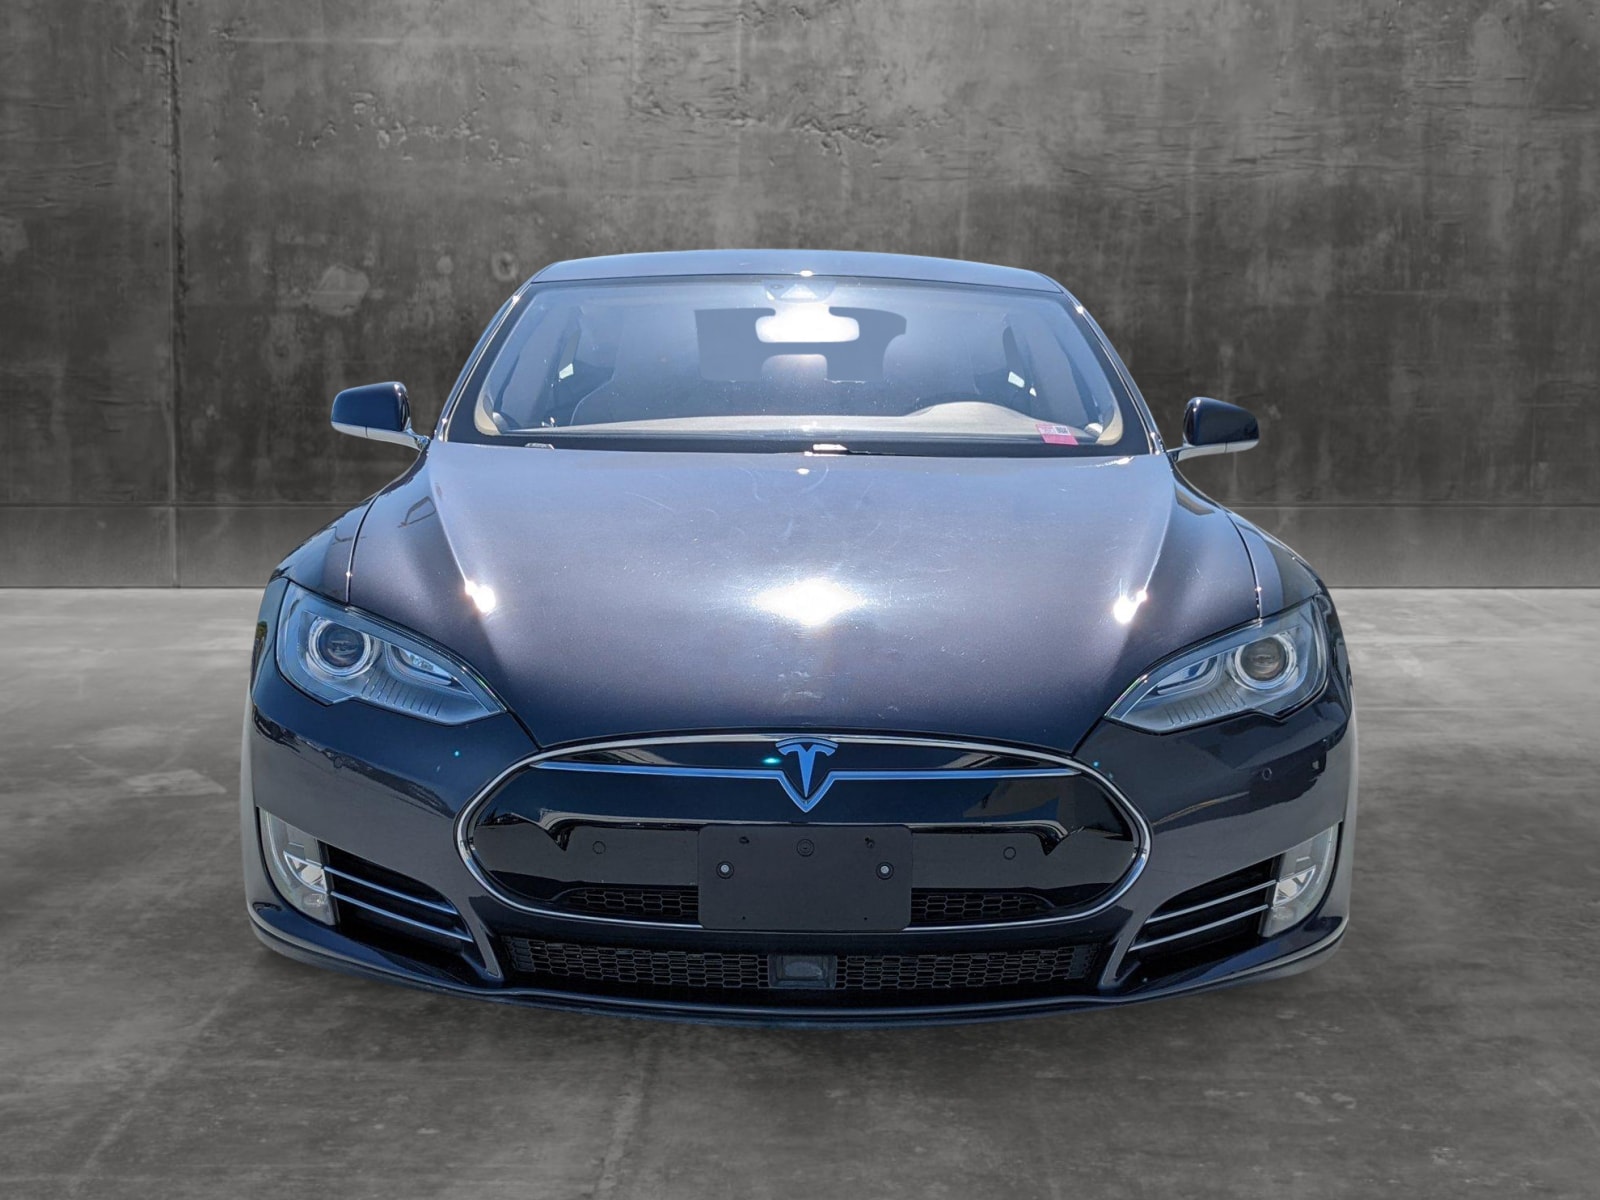 Used 2015 Tesla Model S 85 with VIN 5YJSA1H17FF081775 for sale in Mountain View, CA